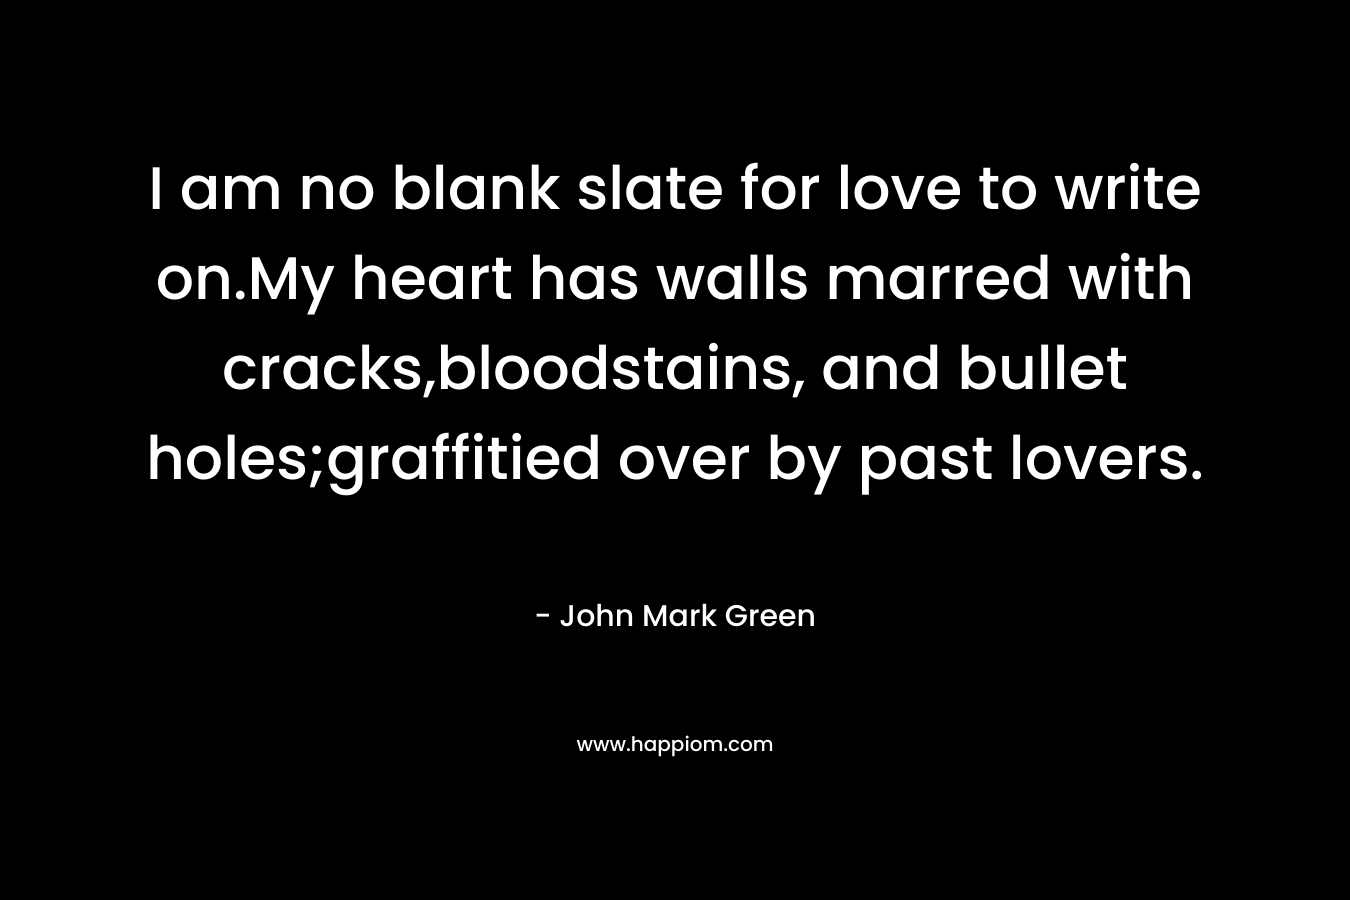 I am no blank slate for love to write on.My heart has walls marred with cracks,bloodstains, and bullet holes;graffitied over by past lovers. – John Mark Green